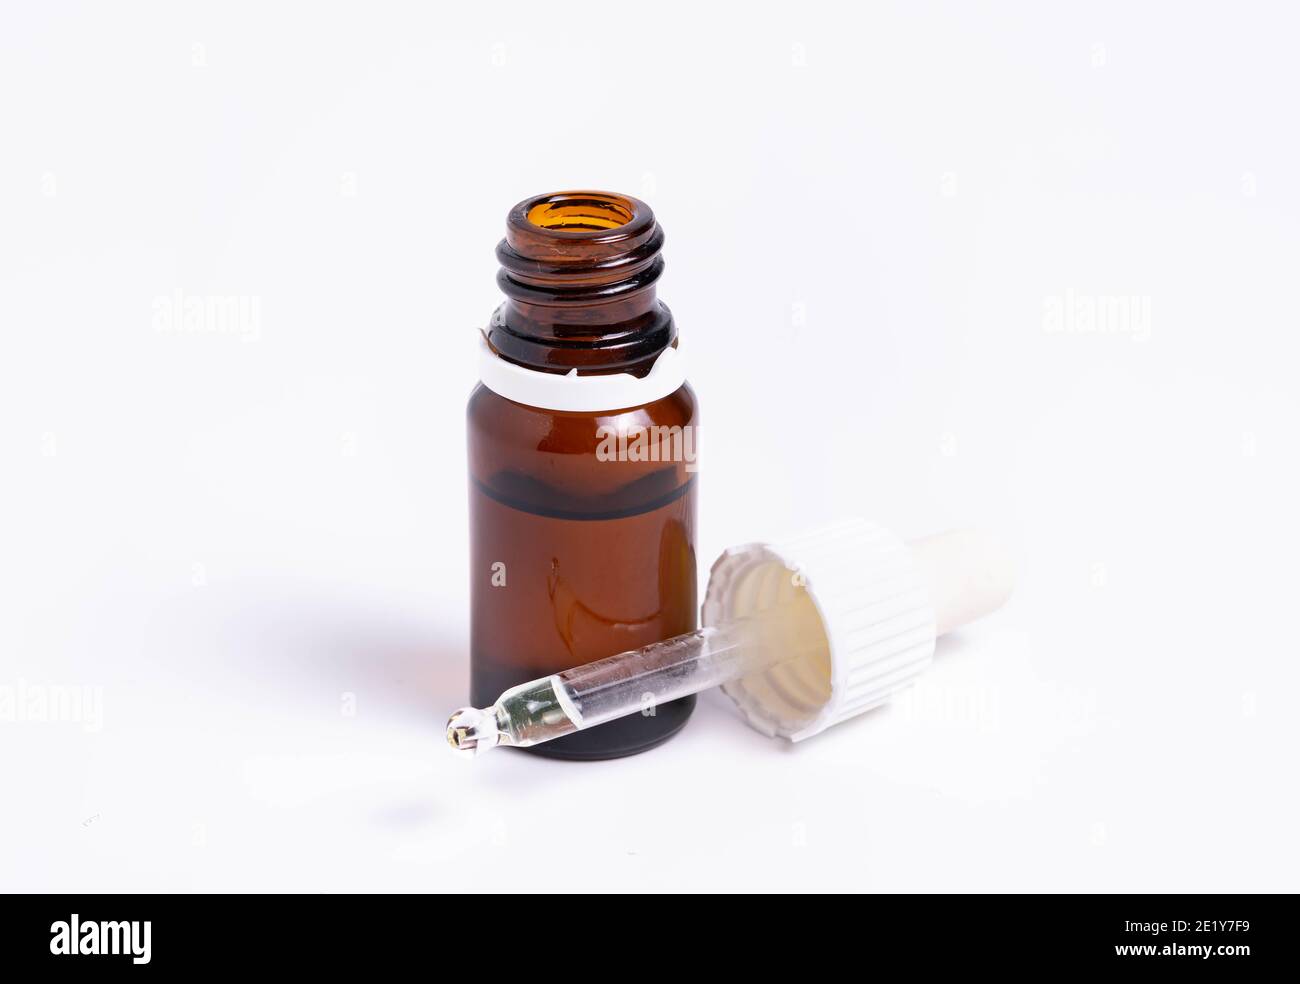 isolate, glass vial with pipette on white background Stock Photo